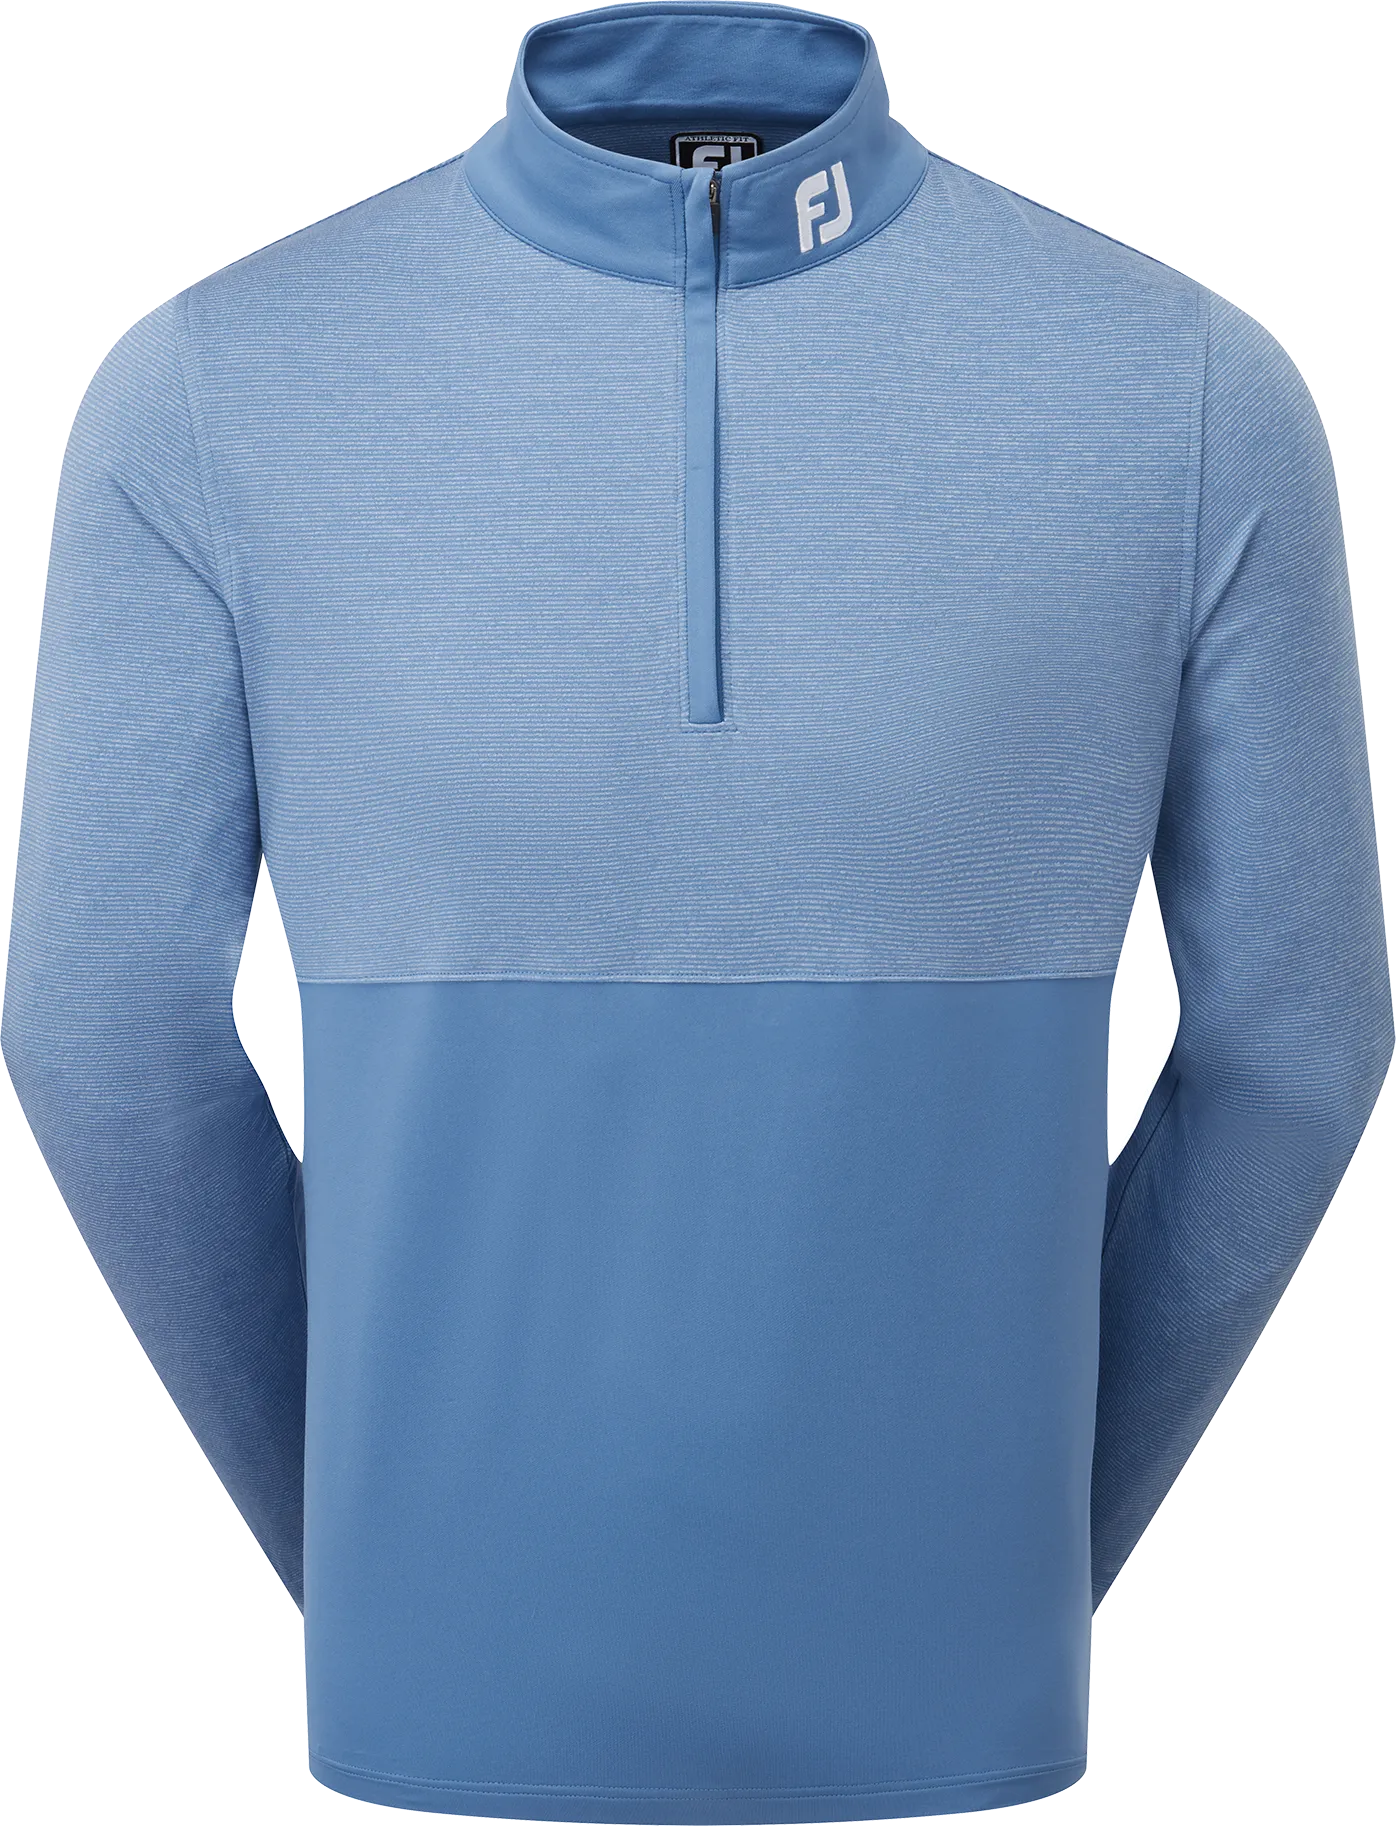 FootJoy Space Dye Blocked Chill-Out Midlayer, saphir